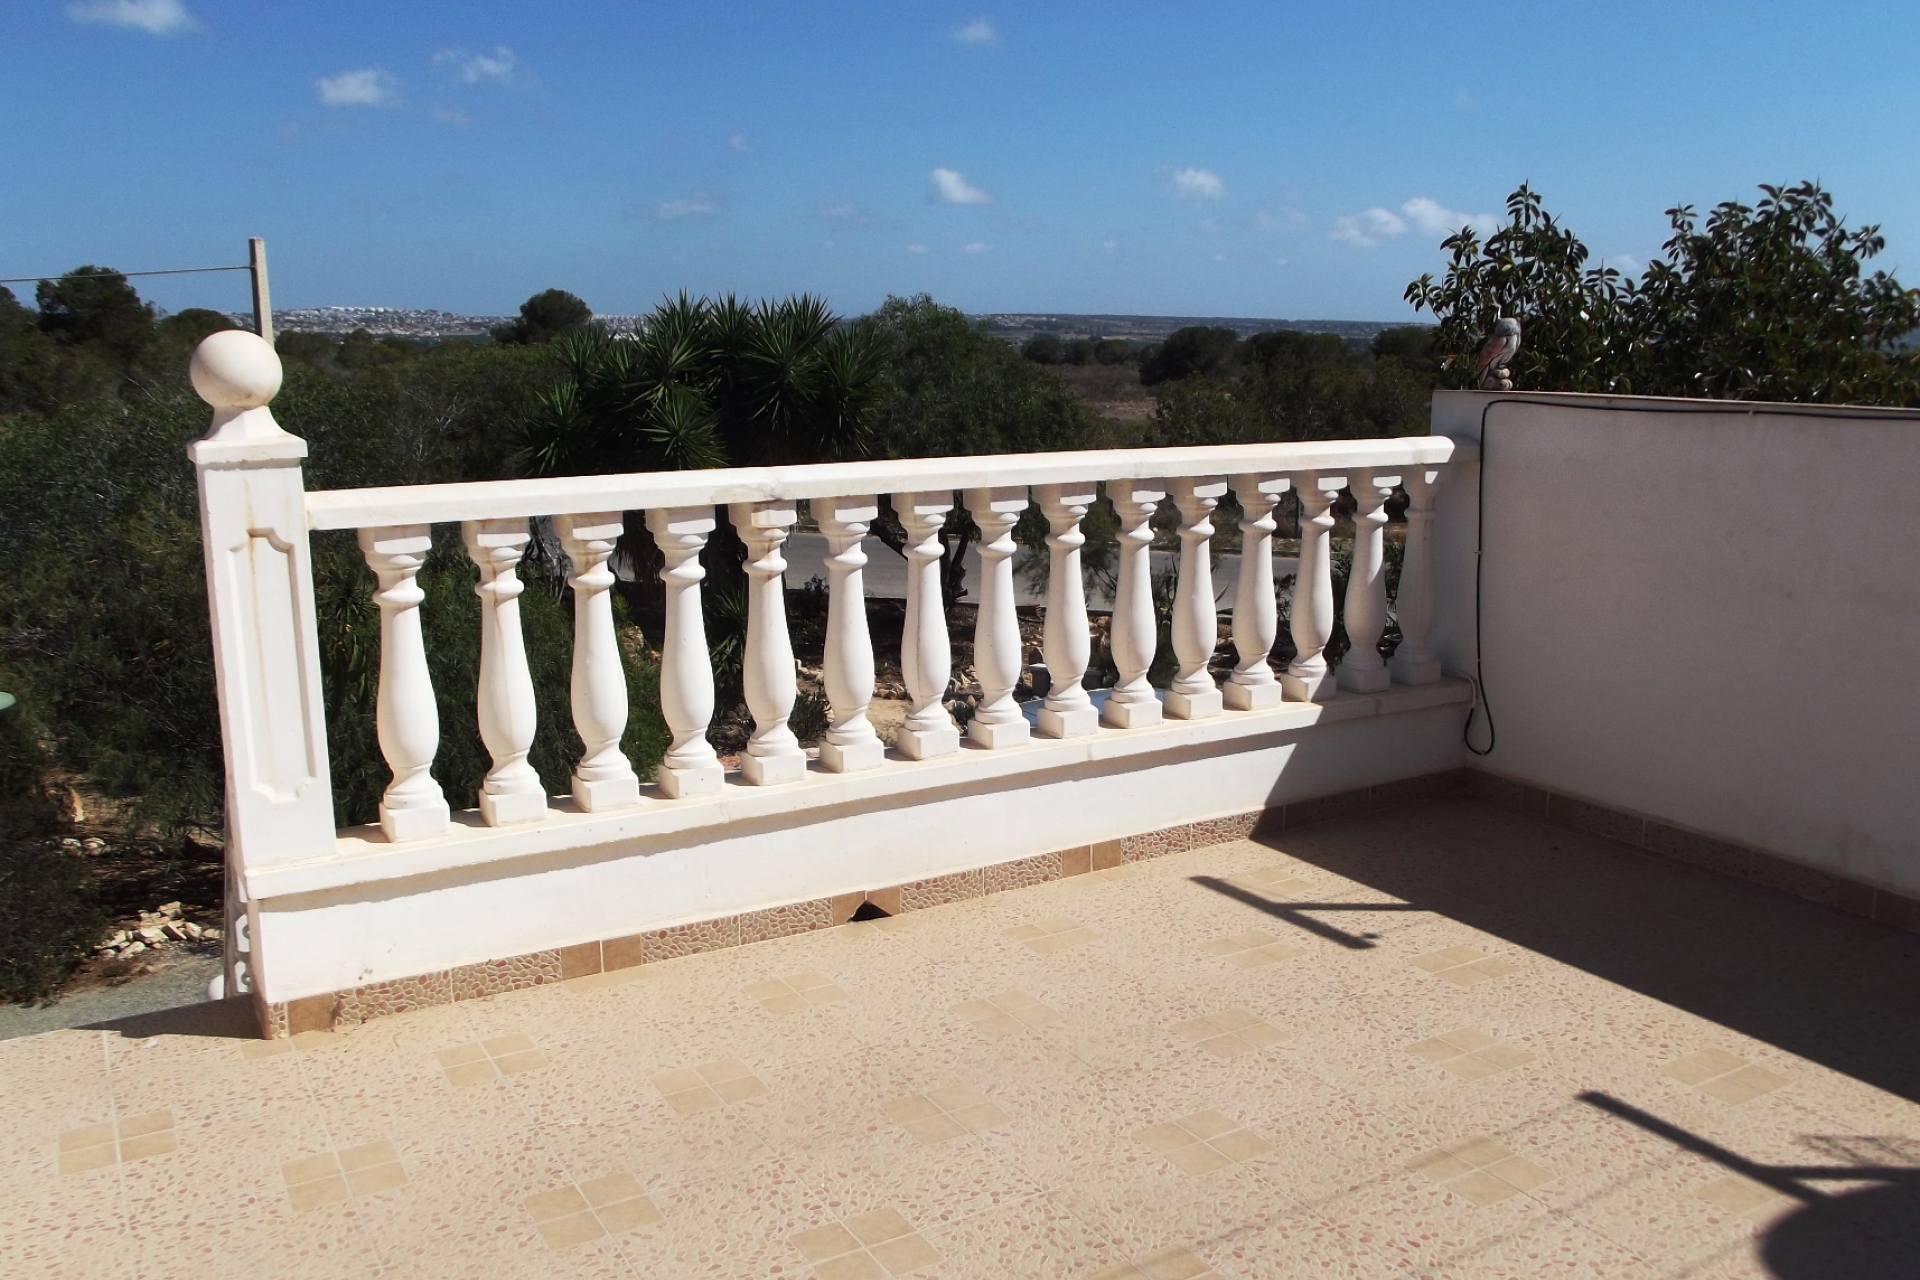 Property on Hold - Townhouse for sale - Torrevieja - San Luis